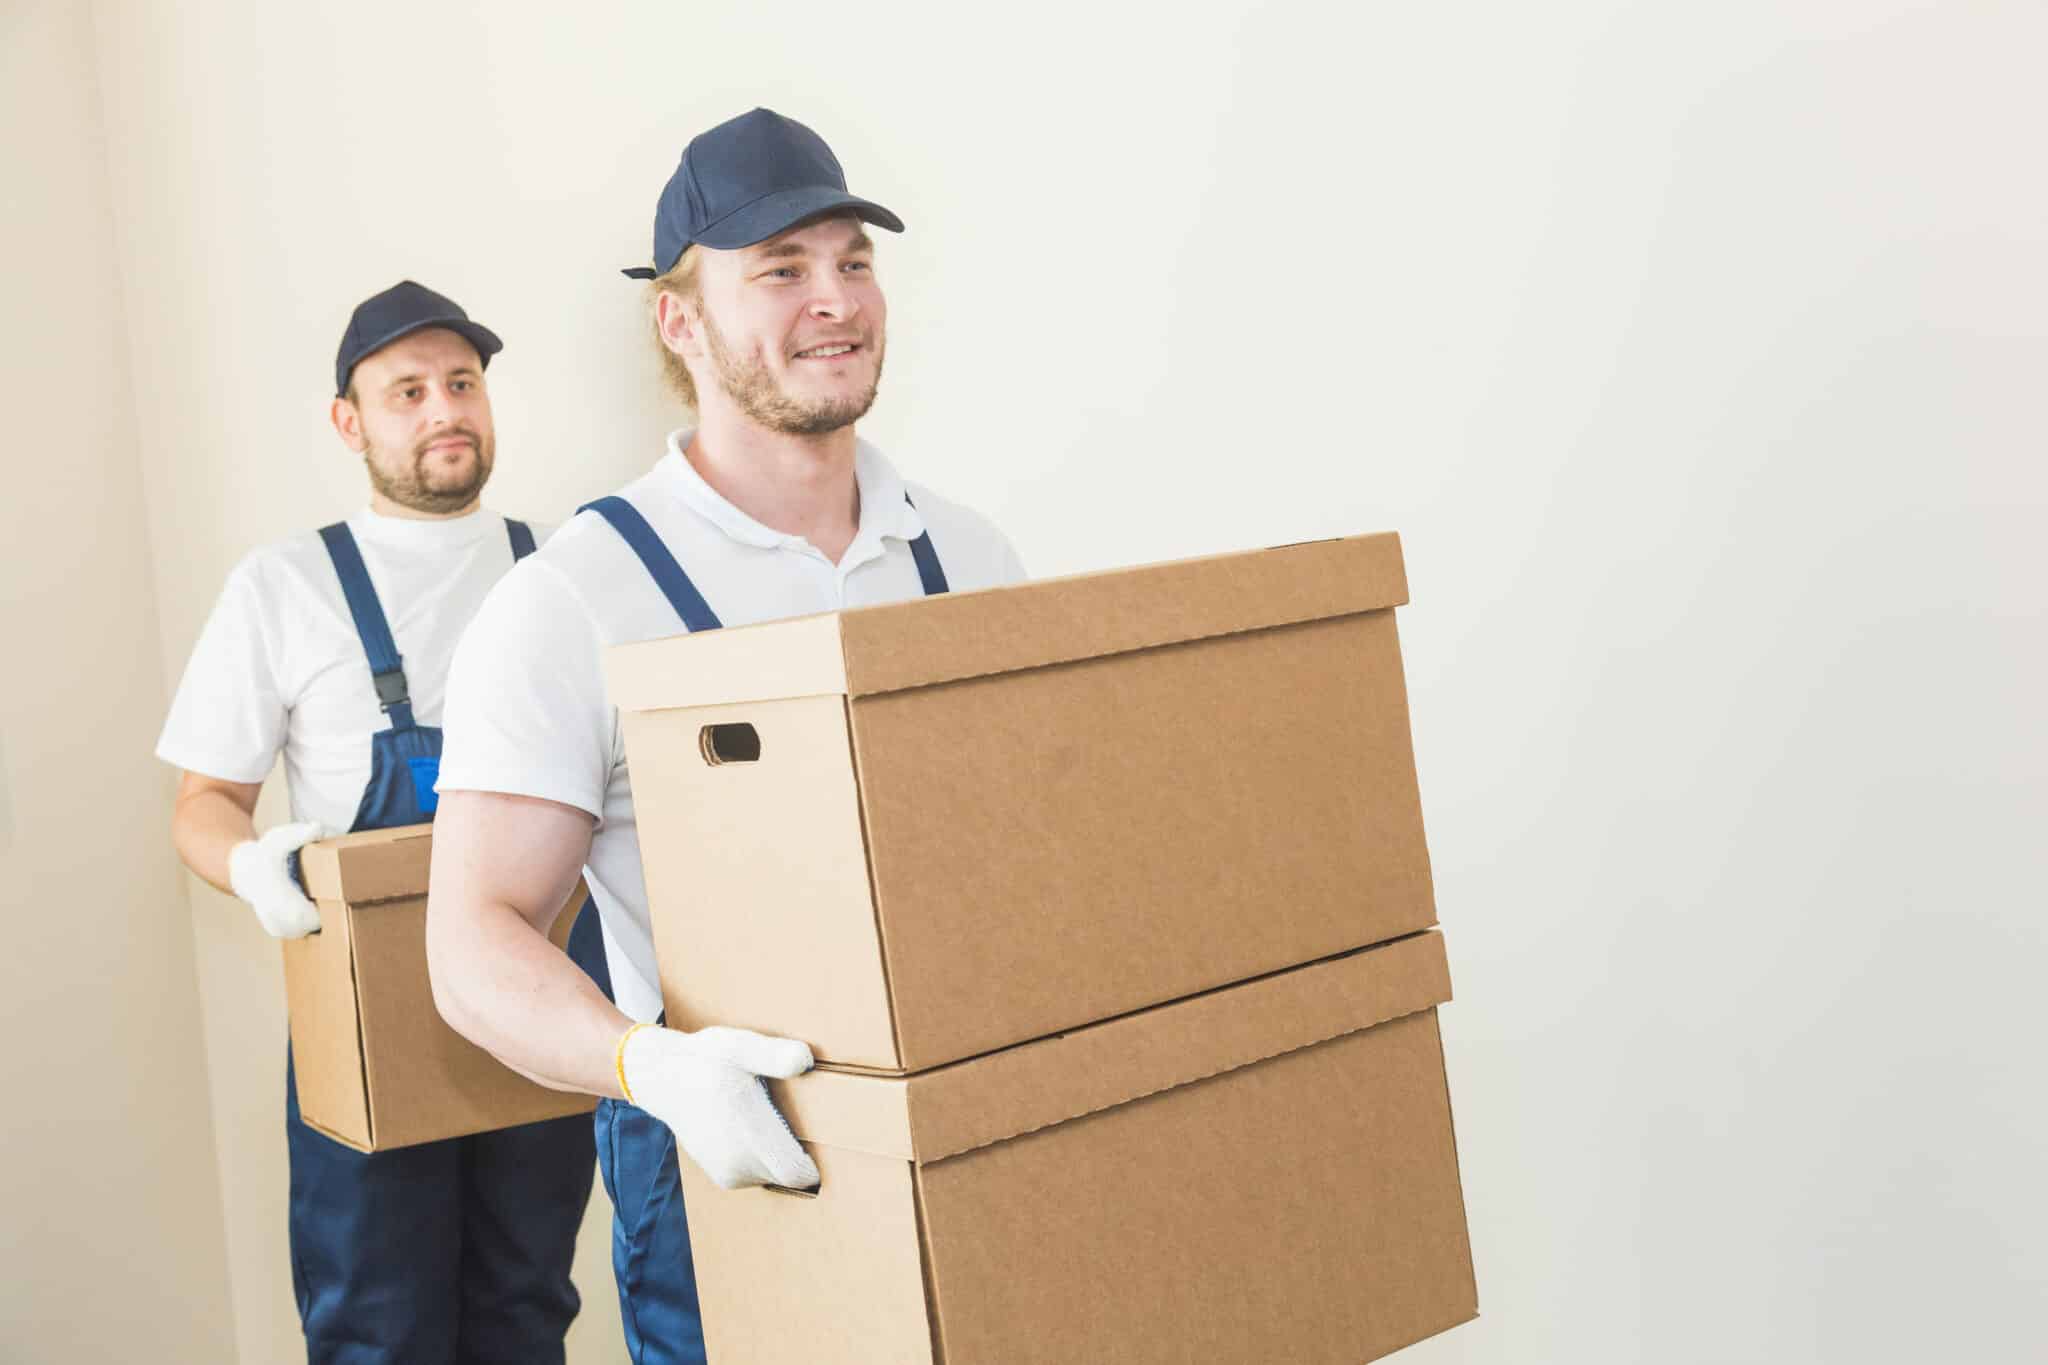 Expert Movers in Arlington, VA: Your Go-To Solution for Stress-Free Relocation